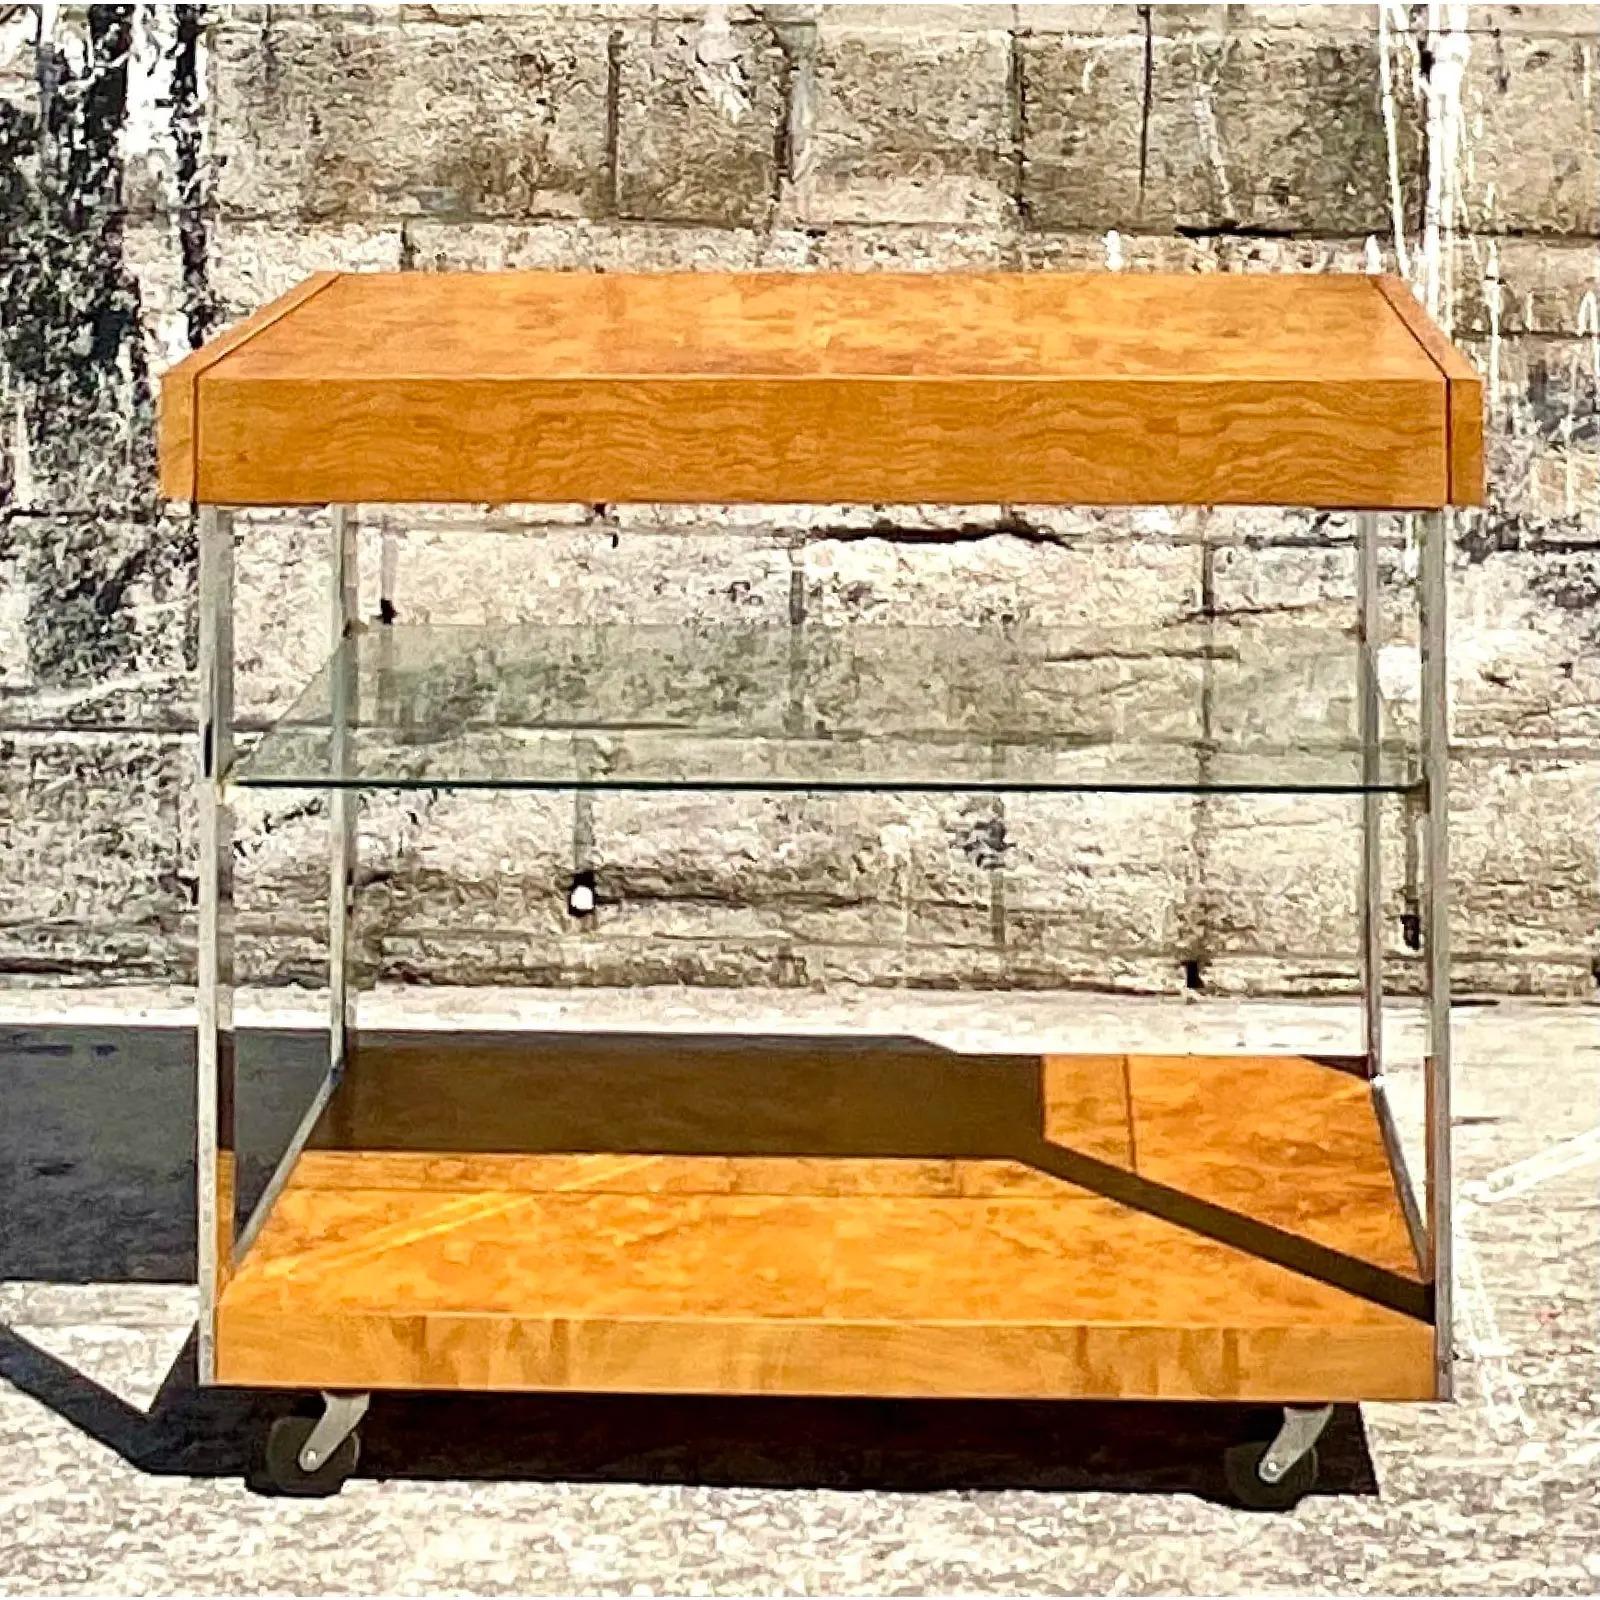 Iconic vintage MCM burl wood bar cart. Made by Lane Furniture as part of their 'Alpha' collection. Beautiful wood breaking detail and sleek classic shape. Extendable arms for additional surface space. Acquired from a Palm Beach estate.